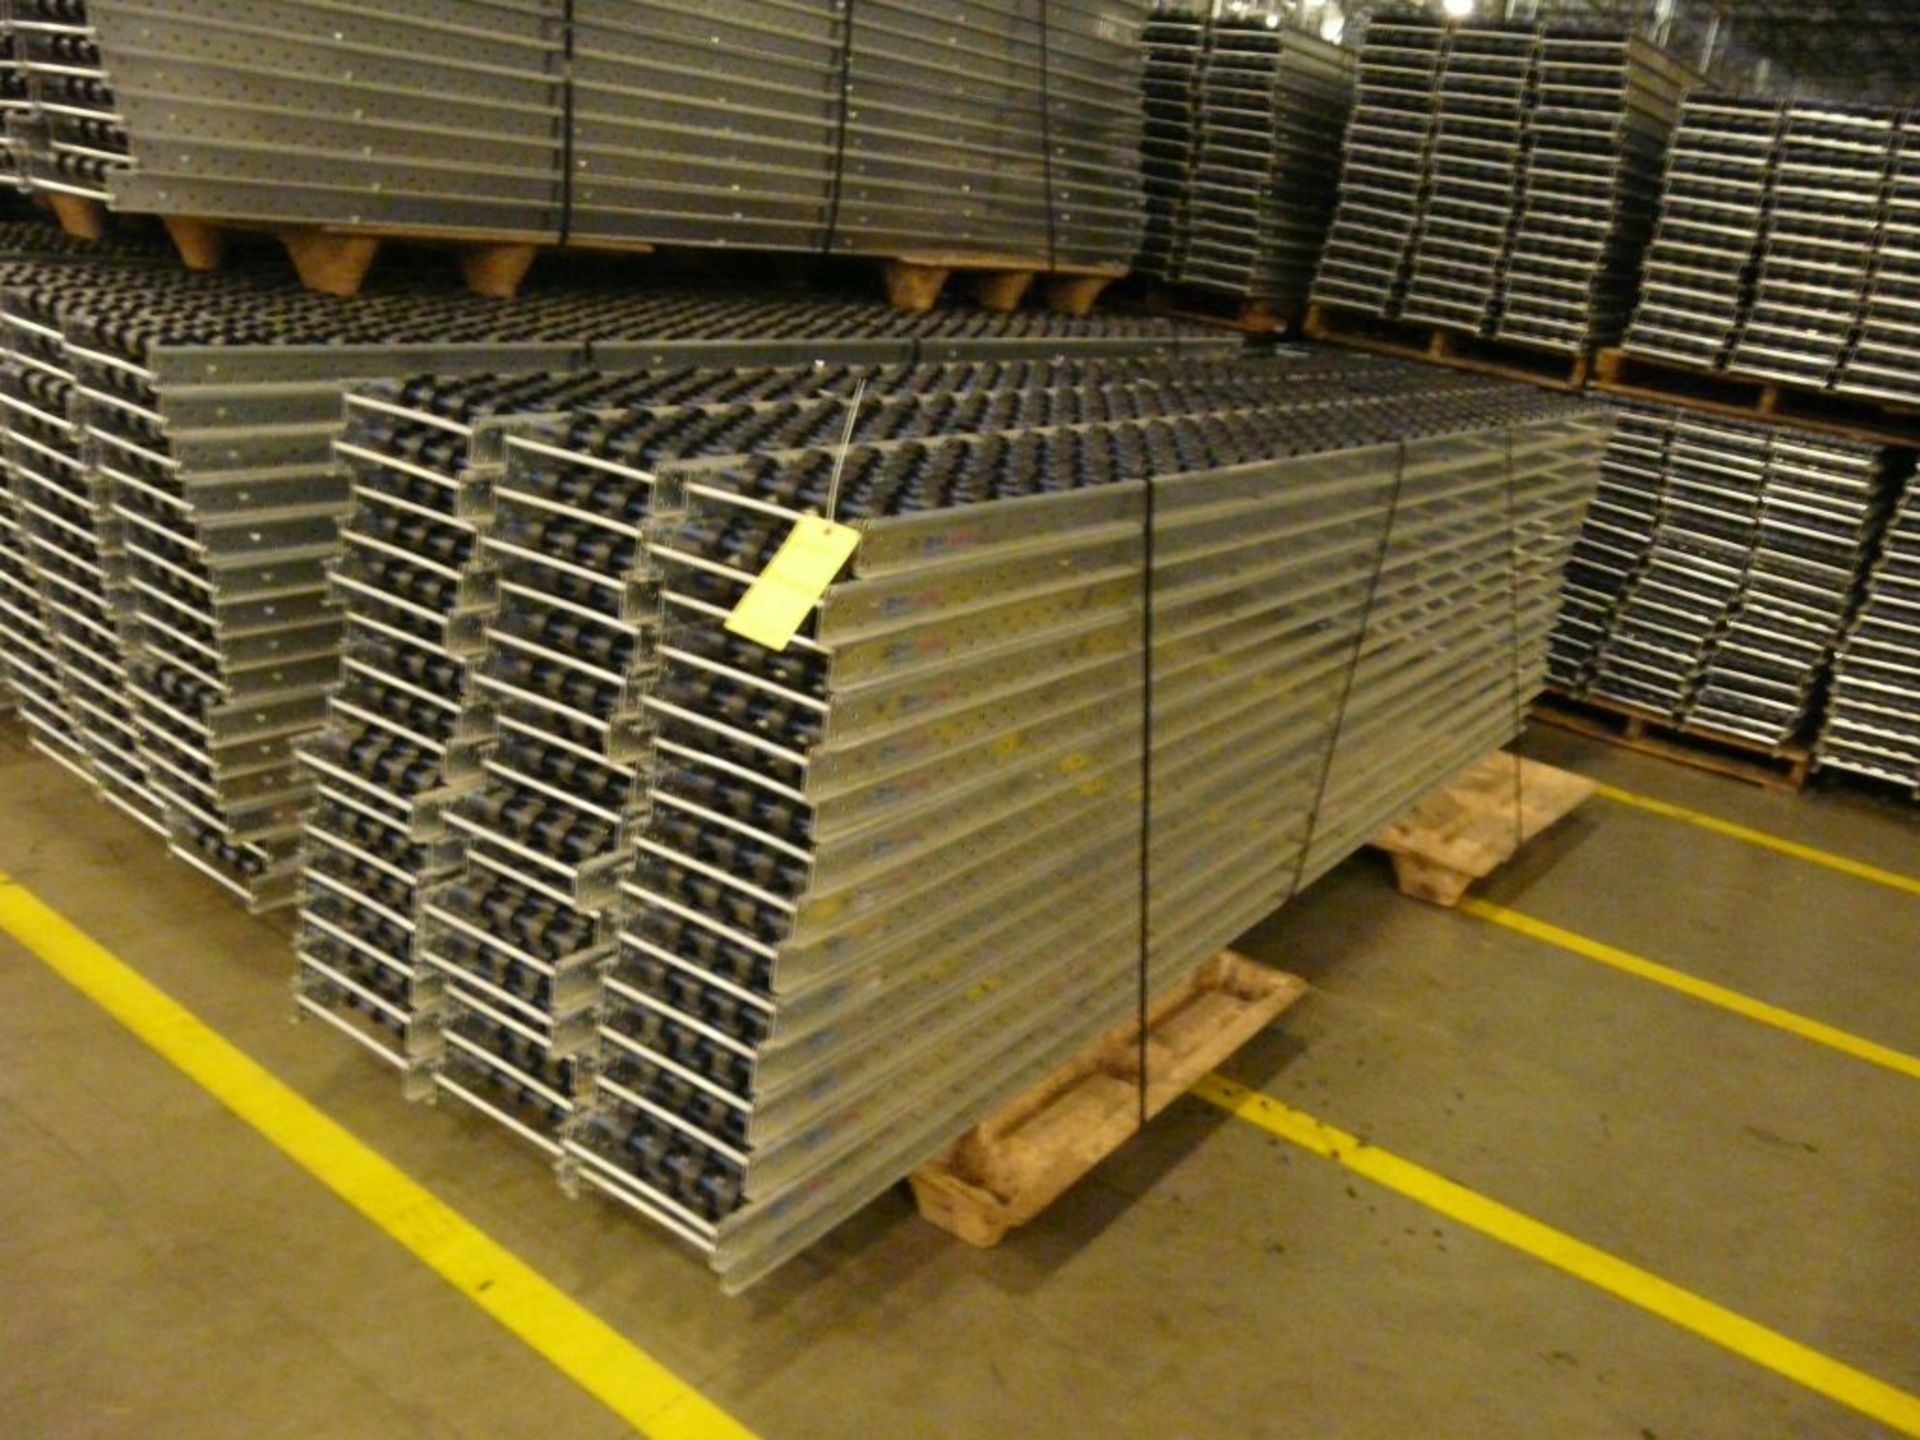 Lot of (90) SpanTrack Wheelbed Carton Flow Conveyors - 11.5'L x 11"W; Tag: 223570 - $30 Lot